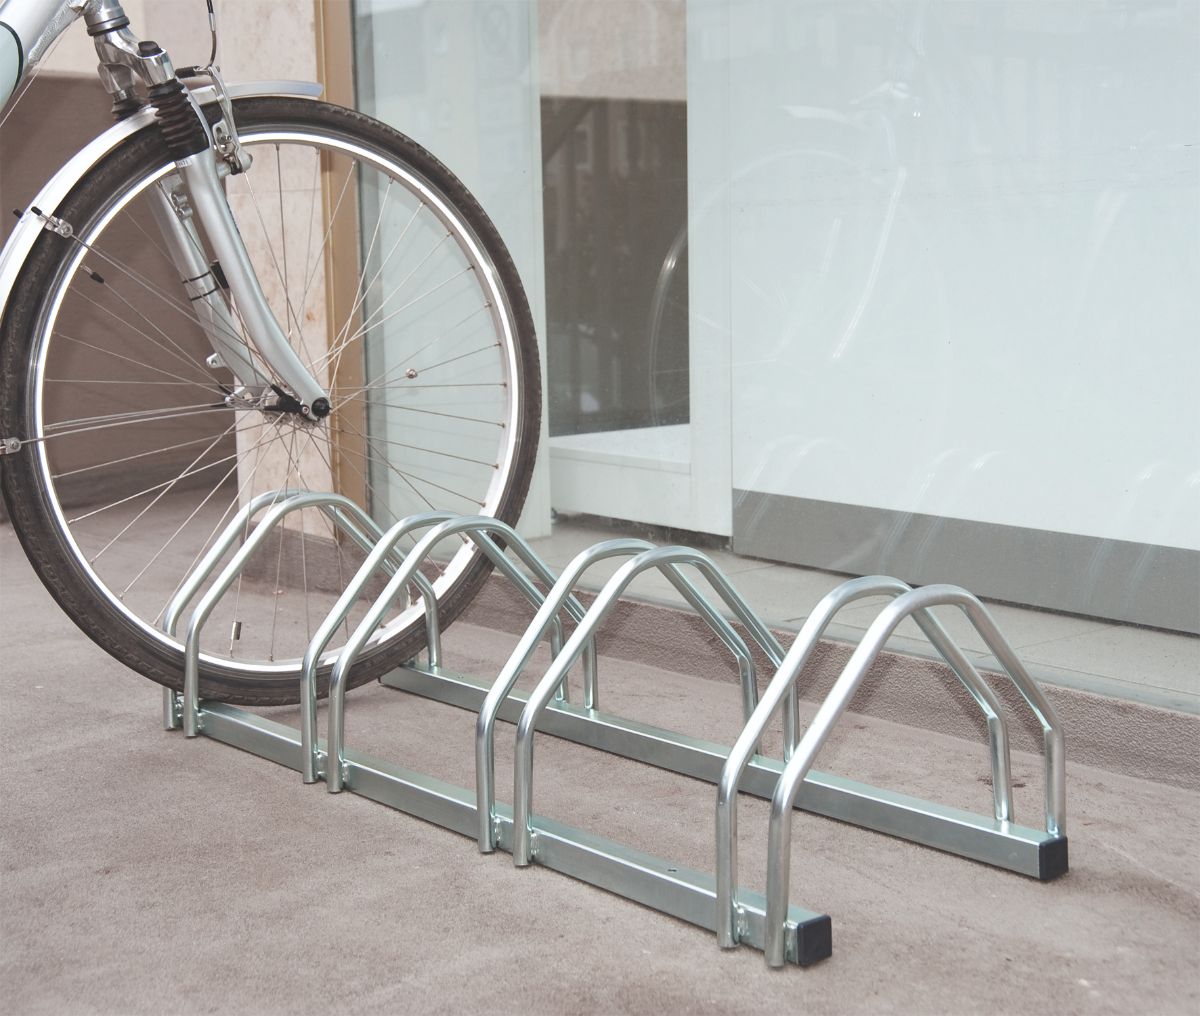 https://cdn.shopify.com/s/files/1/0866/0808/collections/compact-outdoor-cycle-parking-rack.jpg?v=1591195255